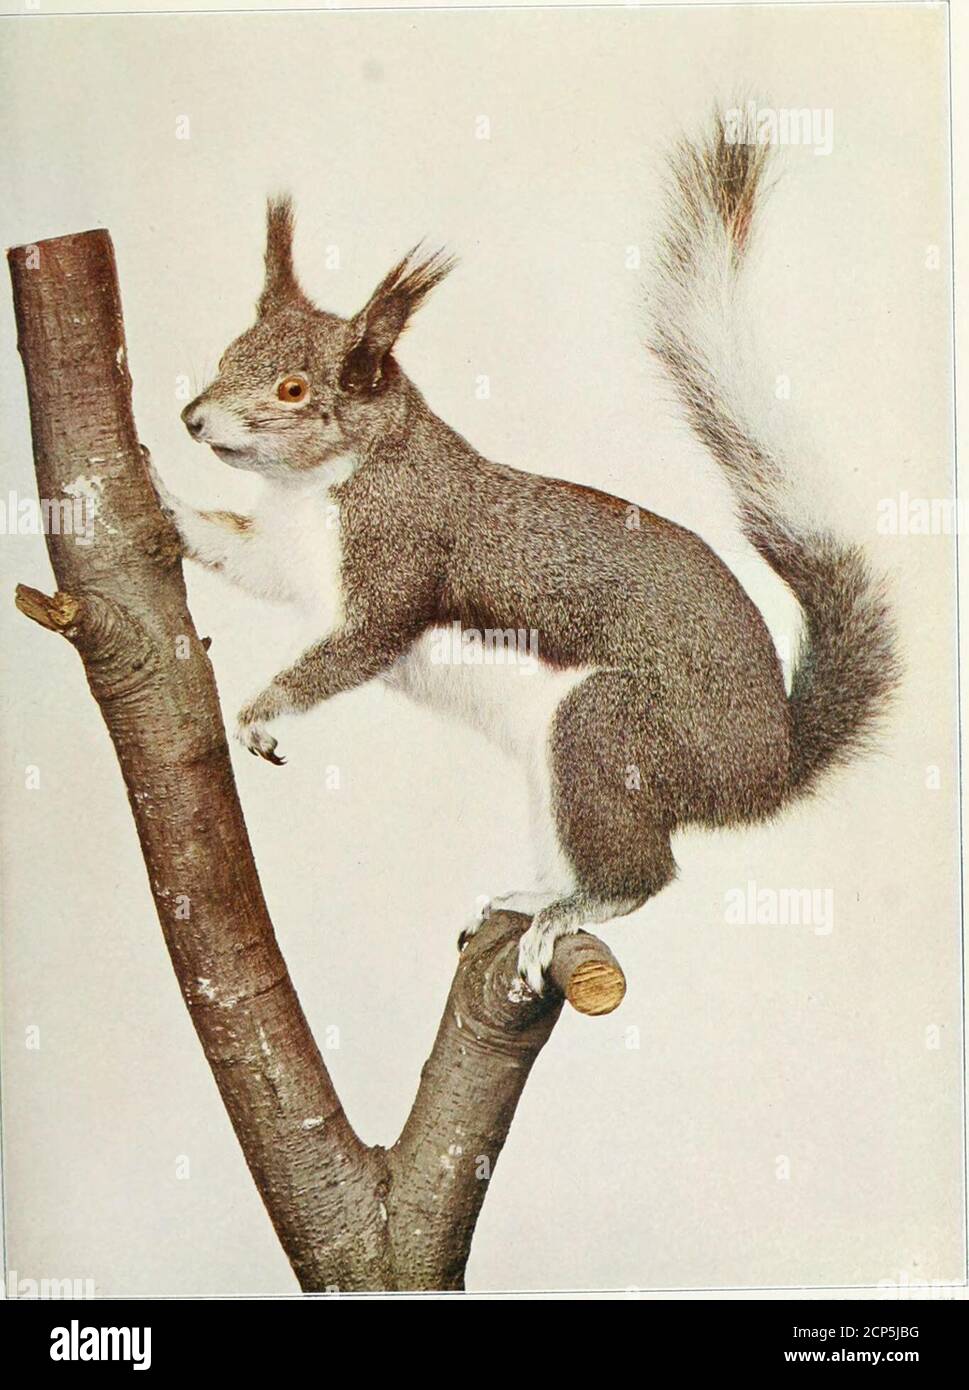 . www.flickr.com/photos/internetarchivebookimages/tags/book... . ABERTS SQUIRREL- Sciurus aberti). About !-•; Life-size. A GROUP OF RODENTS 123 Squirrels are frequently domesticated and become astame as any household tabby. Unfortunately, dogs and catsseem to show a relentless enmity toward them, as they dotoward all rodents. The squirrel is willing to be friendly,and no doubt would gladly affiliate with them, but theinstinct of the canine and the feline impels them to exter-minate it. THE ABERTS SQUIRREL* Aberts Squirrel is one of the handsomest as well as oneof the largest of the American sq Stock Photo